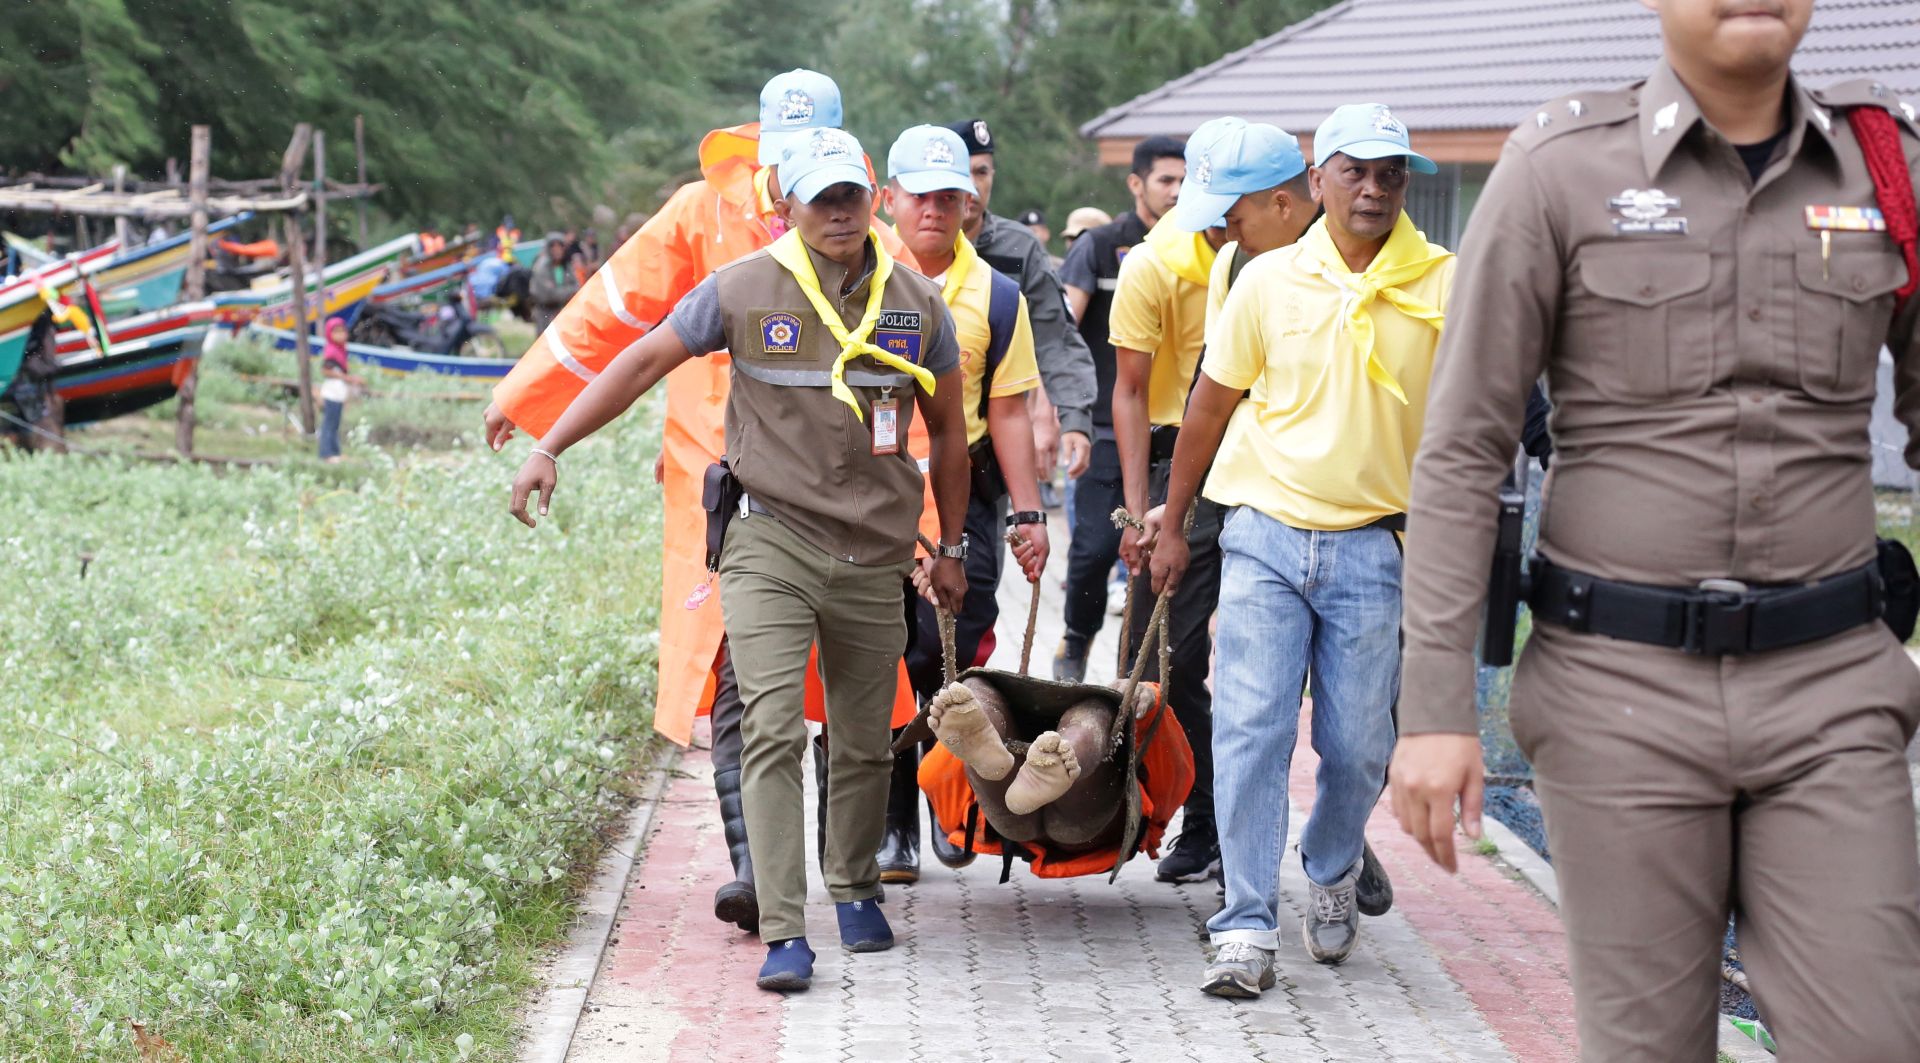 epa07261064 Thai rescue workers carry the body of a fisherman who drowned at sea following heavy downpours and high waves caused by tropical storm Pabuk in Pattani province, Thailand, 04 January 2019. Thousands of people evacuated from their homes after 11 southern coast provinces have been put on a weather warning as tropical storm Pabuk is expected to bring heavy downpours, strong winds and high waves. According to the Thai Meteorological Department, Tropical Storm Pabuk was moving west into the Gulf of Thailand on 03 January, with maximum winds of 65kph. Pabuk, poised to make landfall in southern Thailand on 04 January, will be the first tropical storm to hit the country outside of the monsoon season in nearly 30 years, media reported.  EPA/ABDULLAH WANGNI